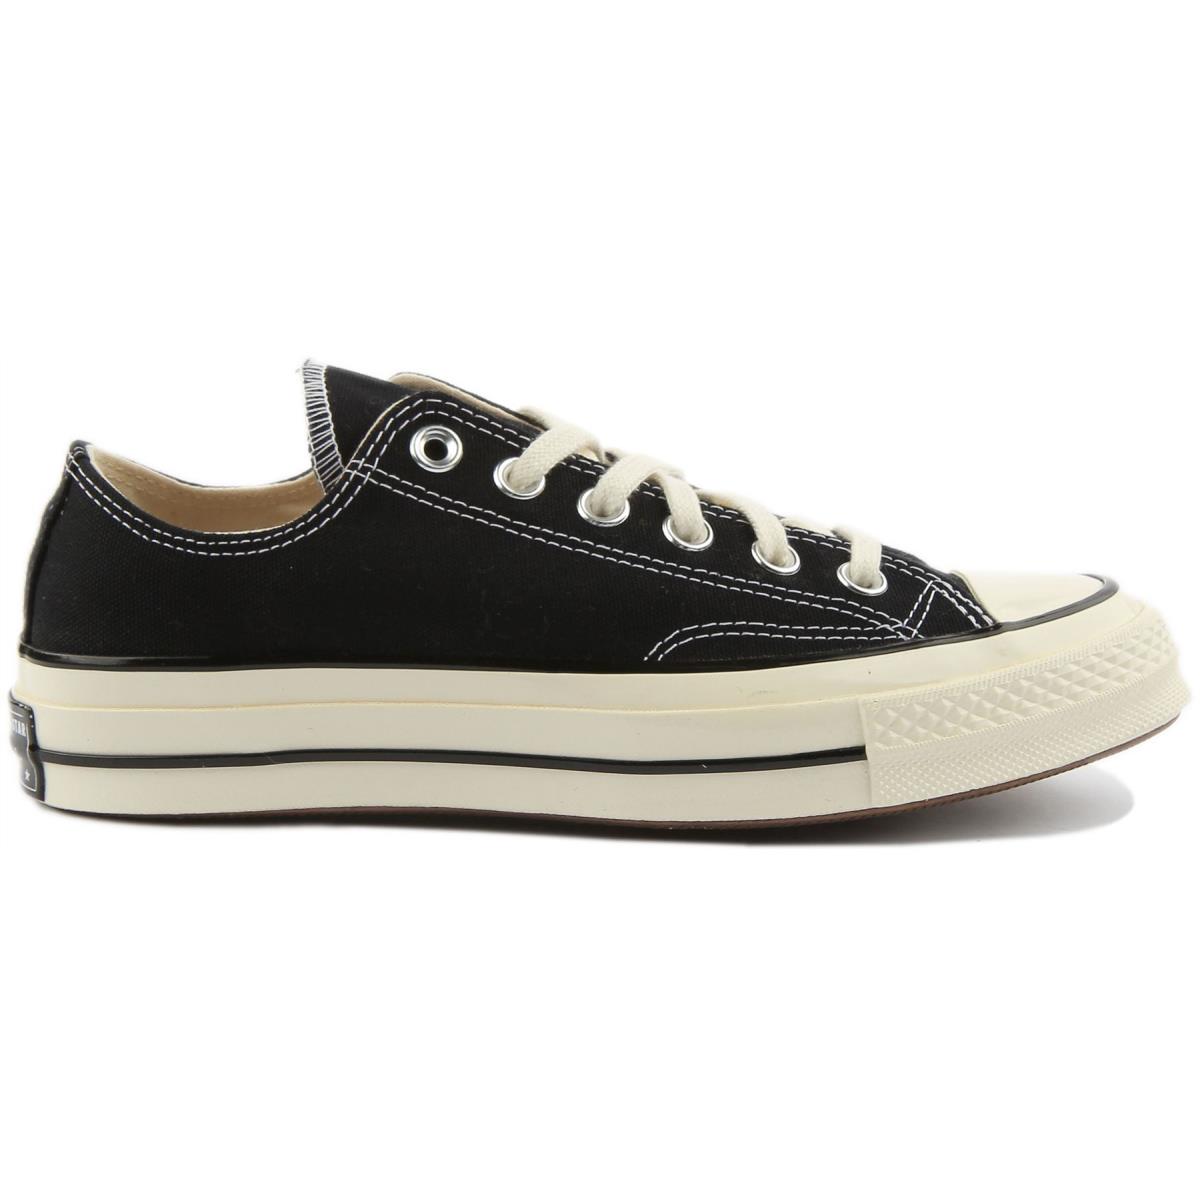 Converse All Star 162058 Chuck 70 Ox Lace Up Trainers In Black Size US 4 - 13